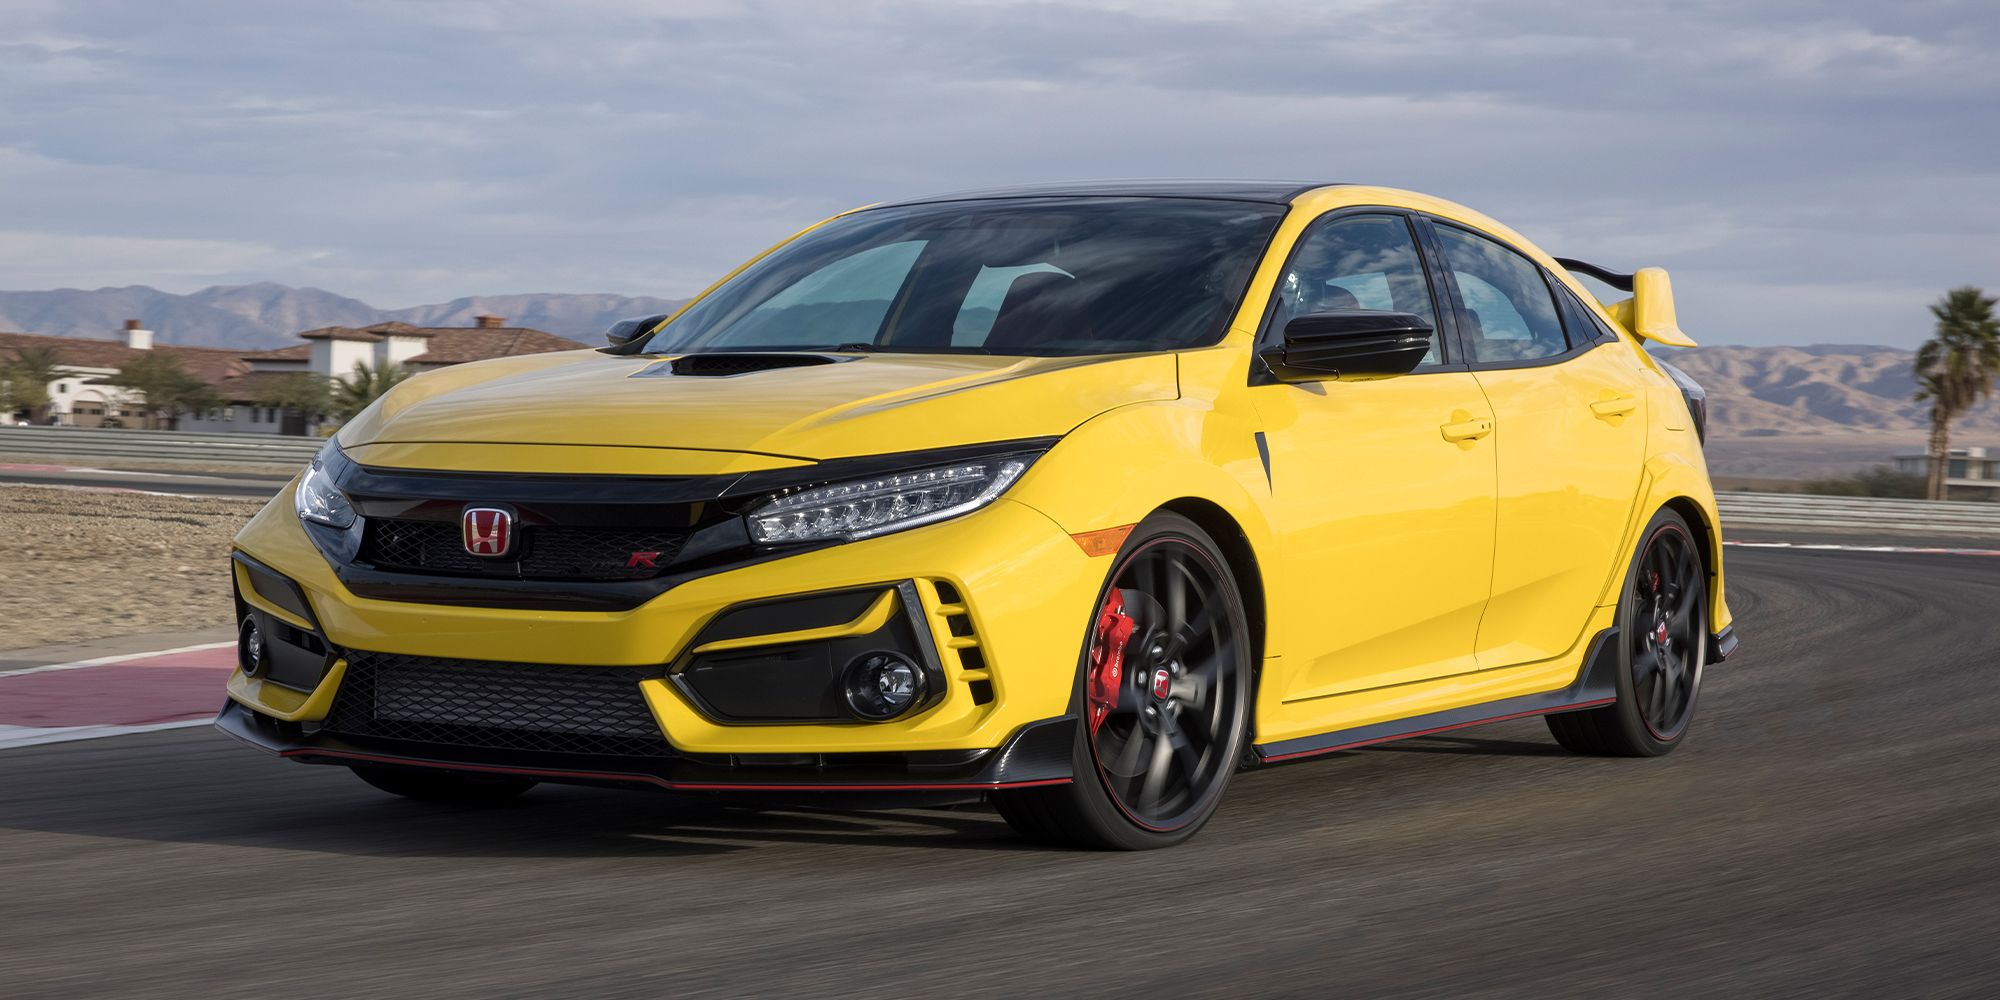 Front 3/4 view of the Civic Type R Limited Edition